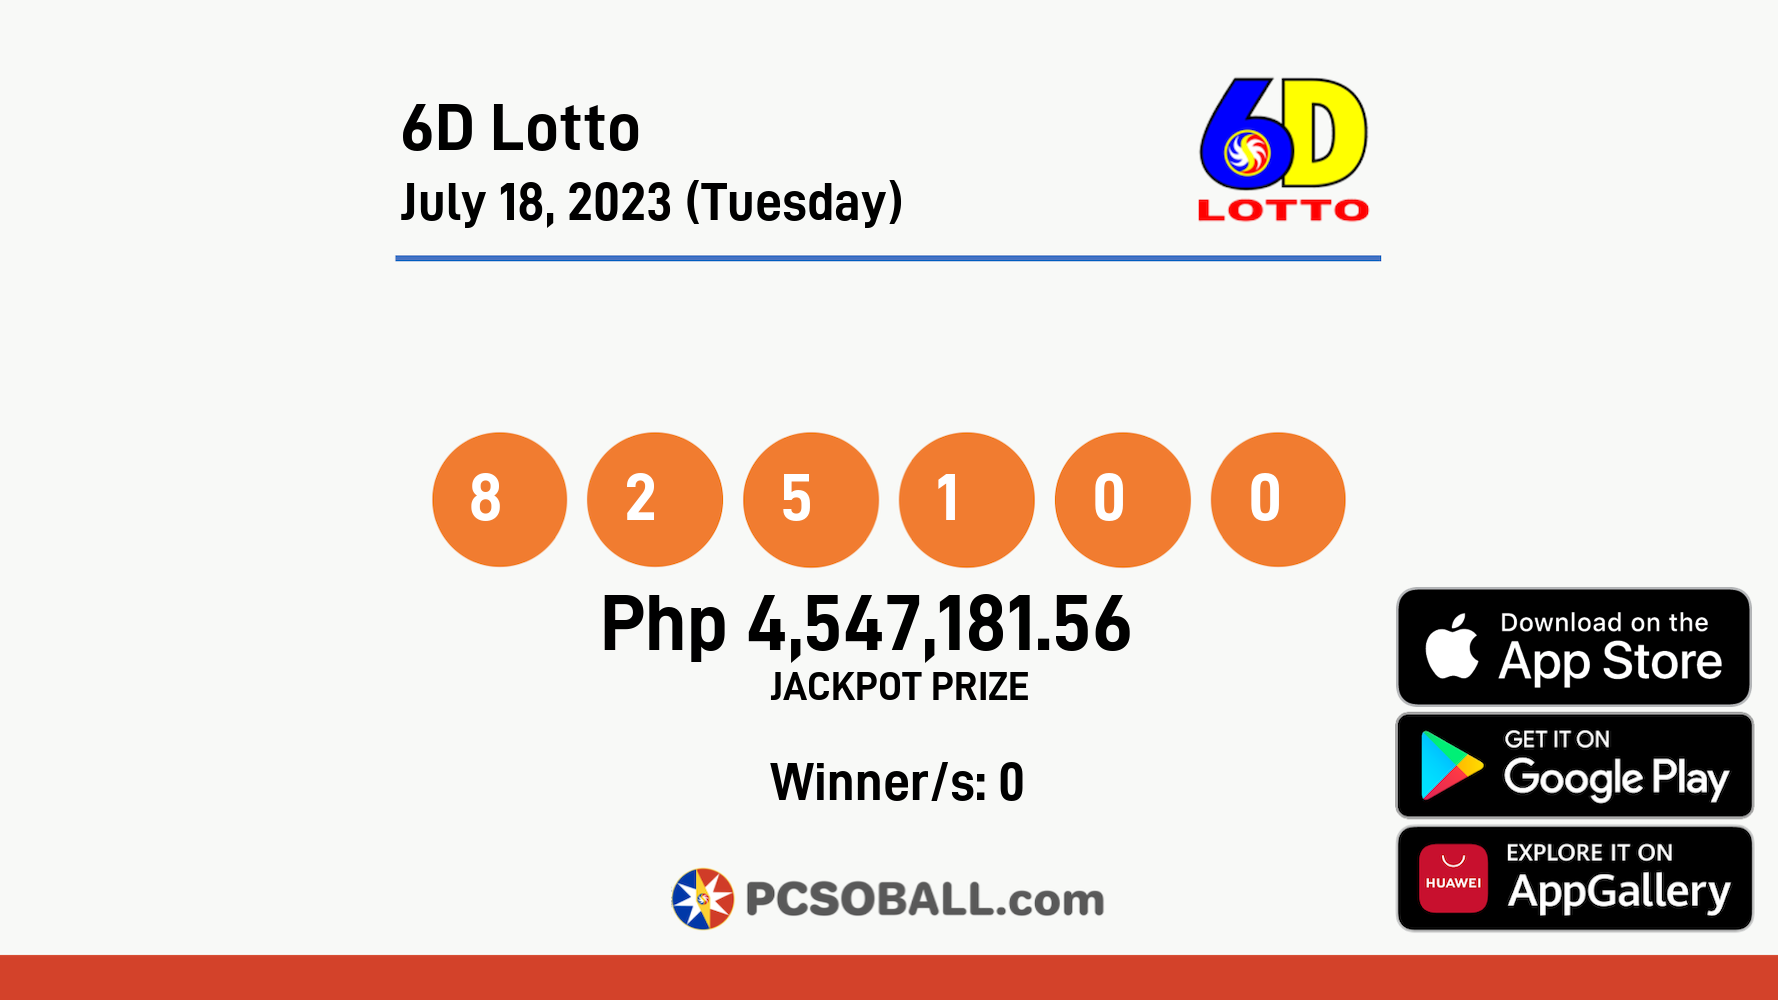 6D Lotto July 18, 2023 (Tuesday) Result